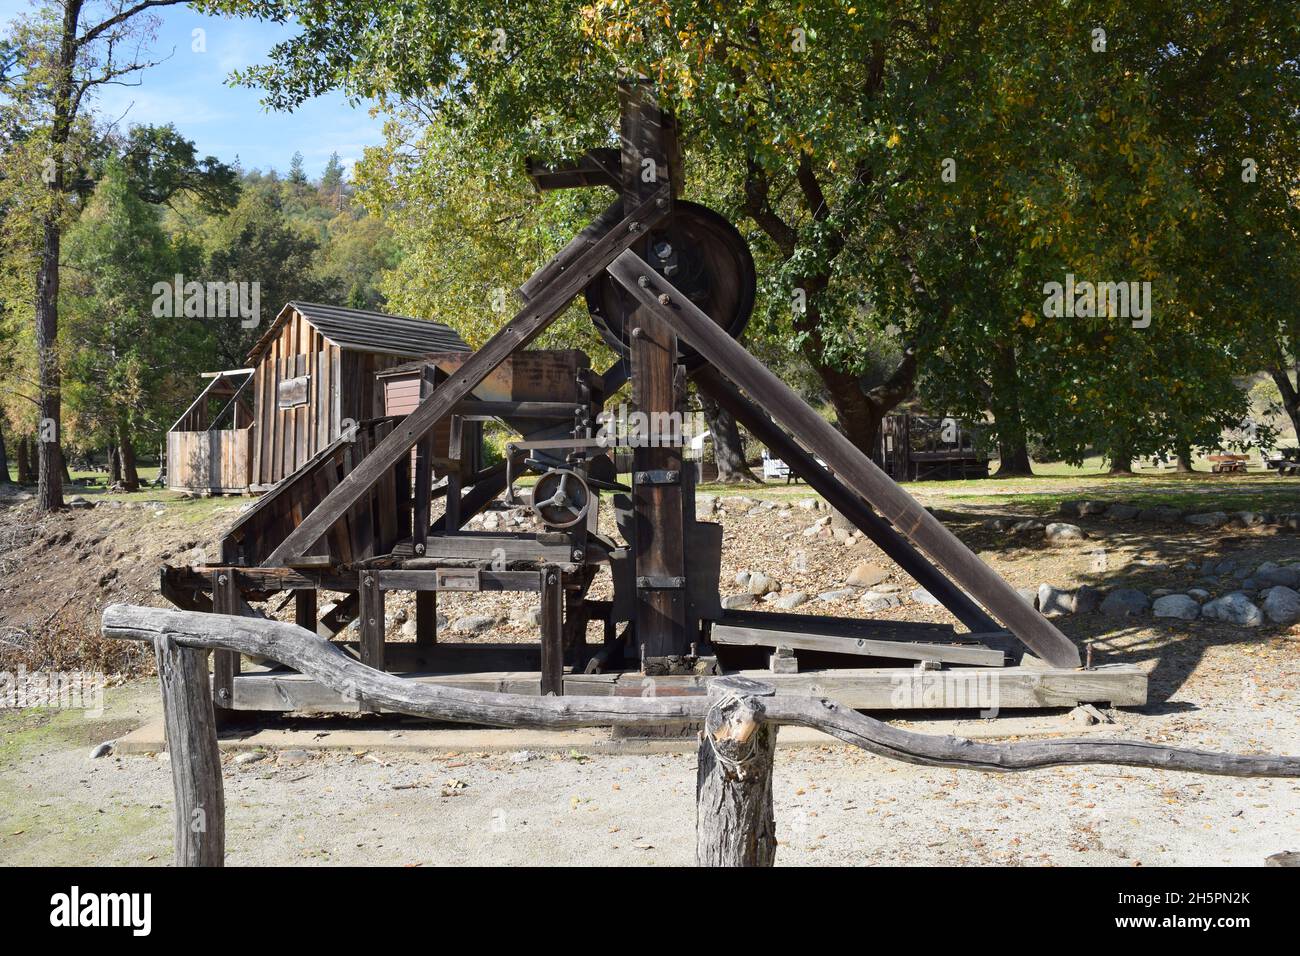 View of a California stamp mill used during the gold rush, a device used to crush ore or stone to reveal deposits of gold. Stock Photo